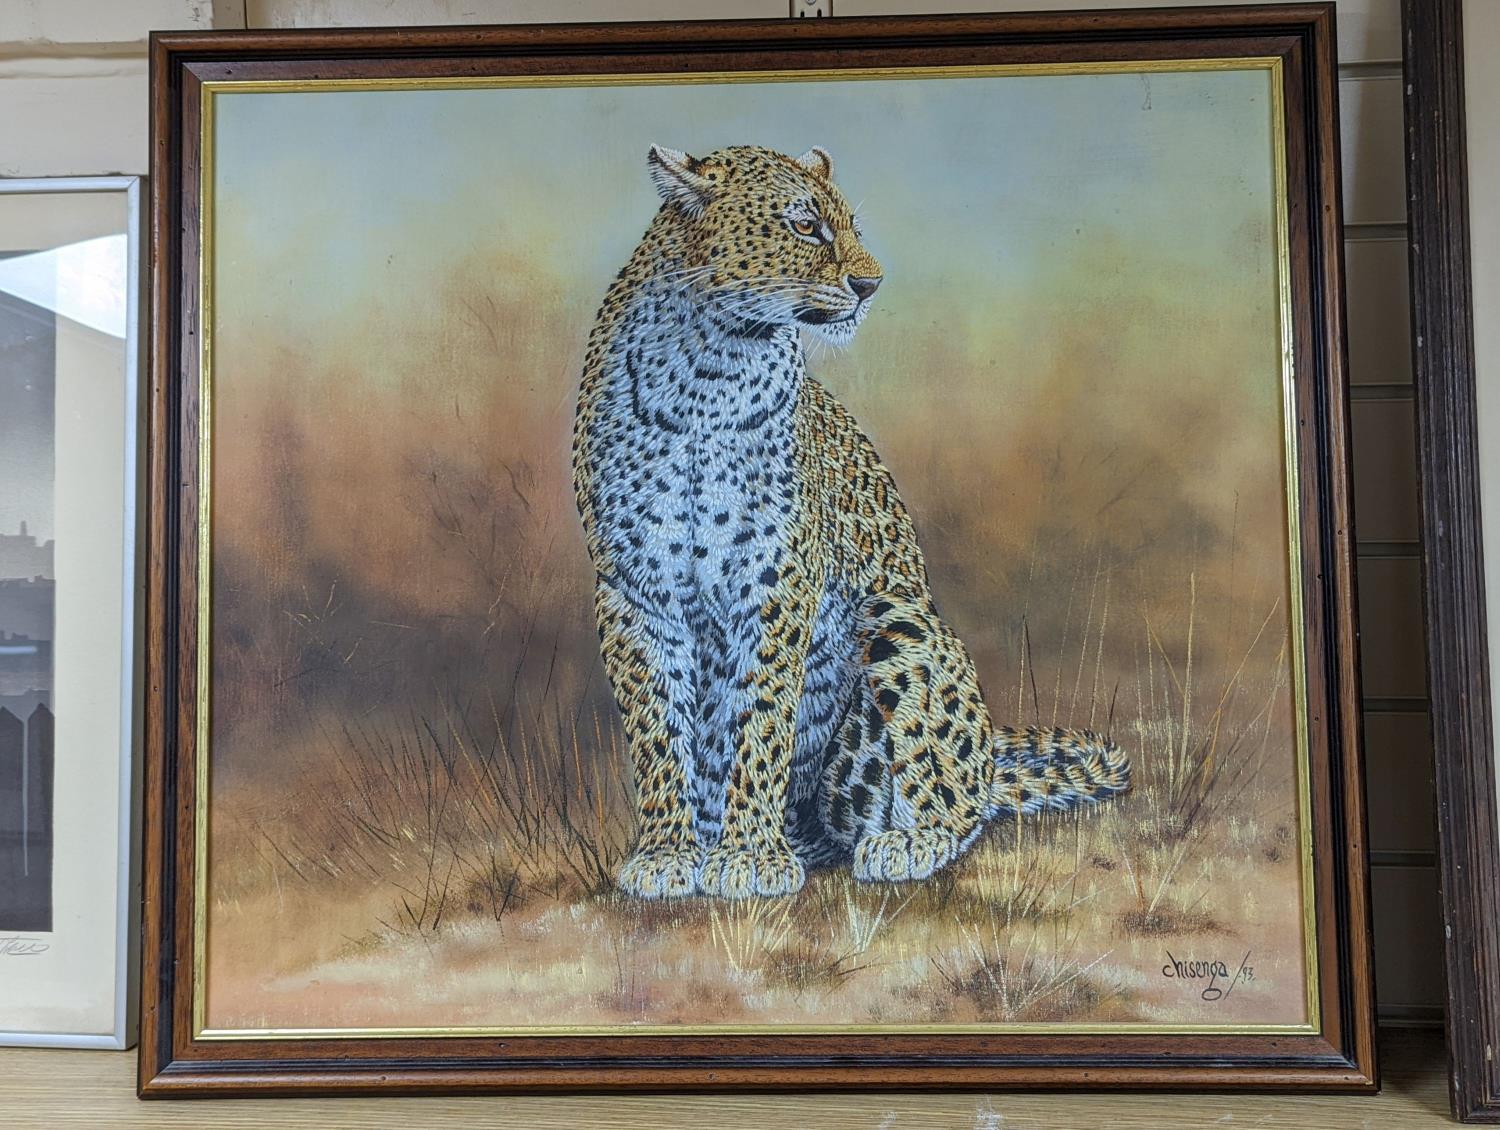 Chisenga, oil on canvas, Study of a leopard, signed and dated '93, 57 x 65cm - Image 2 of 4